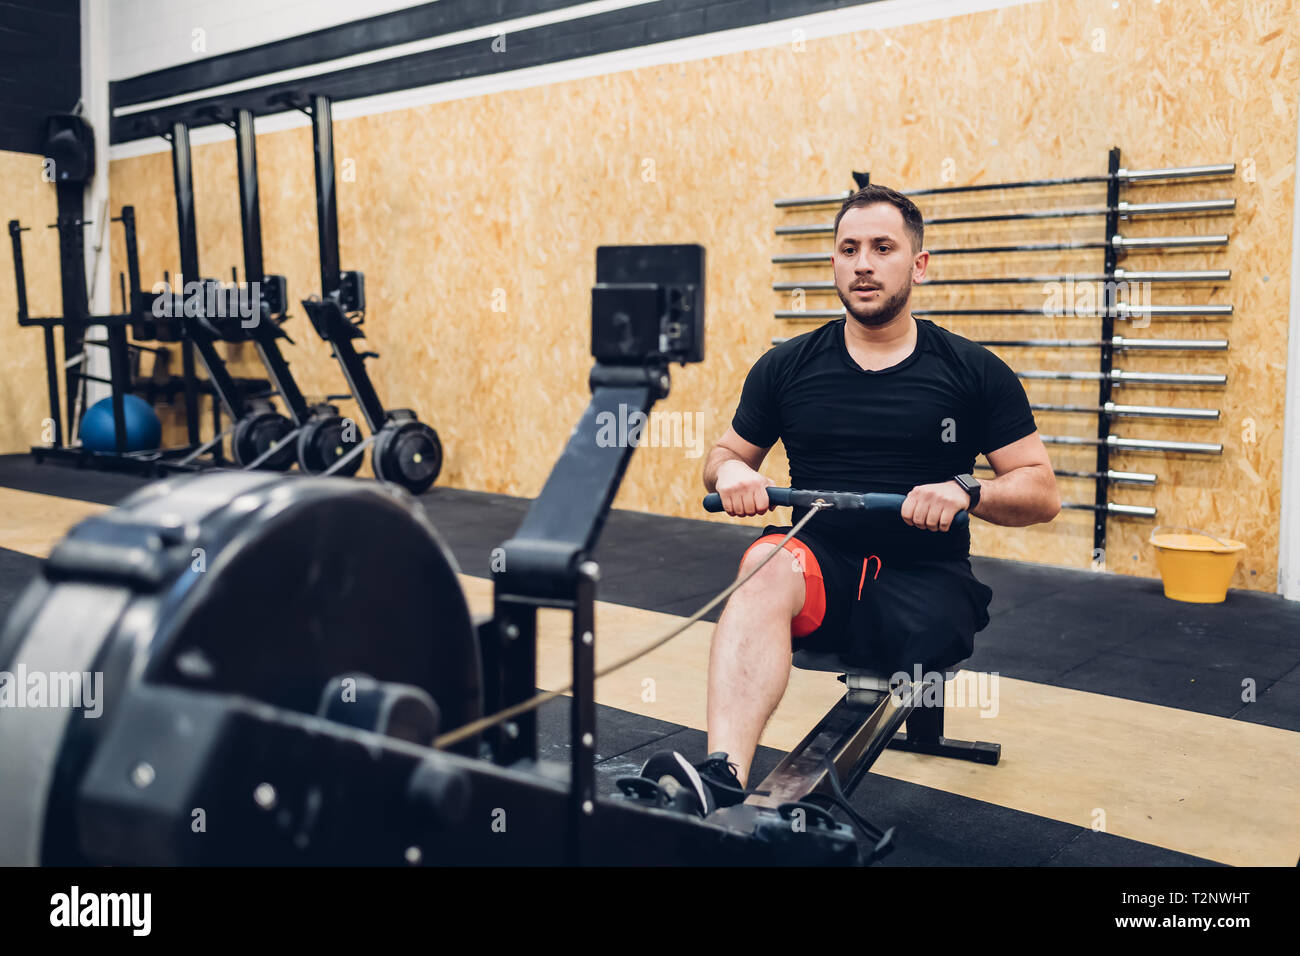 Man with disability using rowing machine in gym Stock Photo